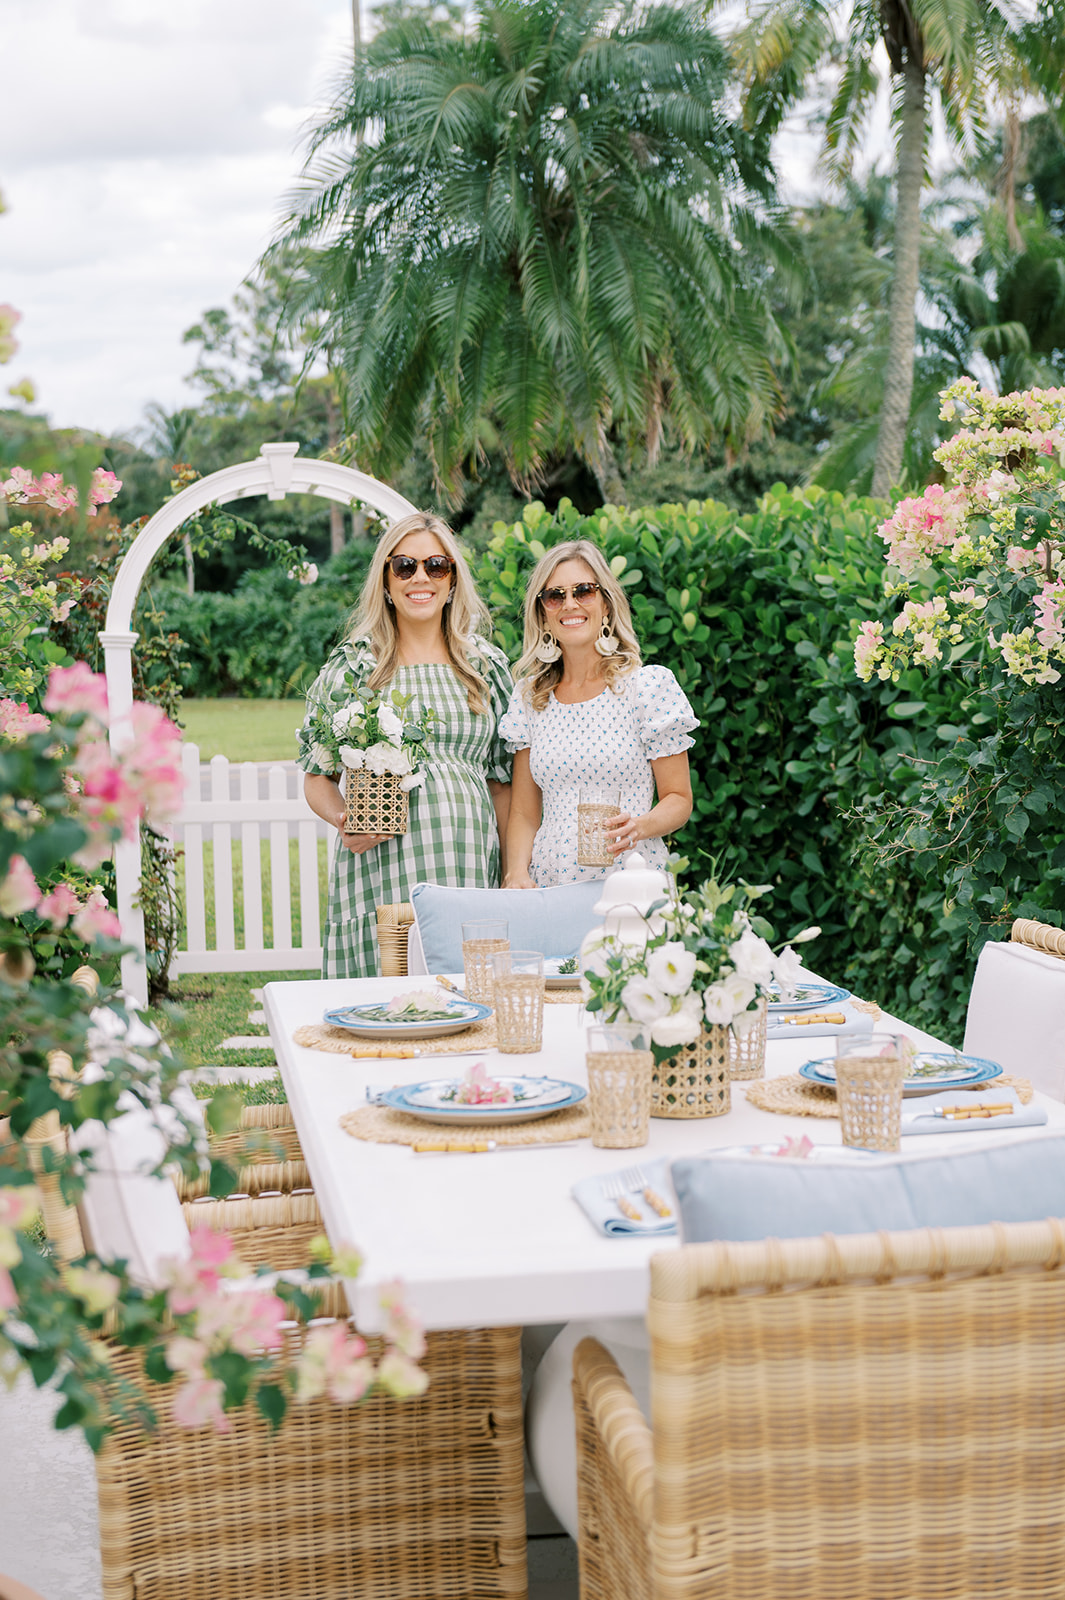 Home: Serena & Lily and Palm Beach Lately Outdoor Furniture